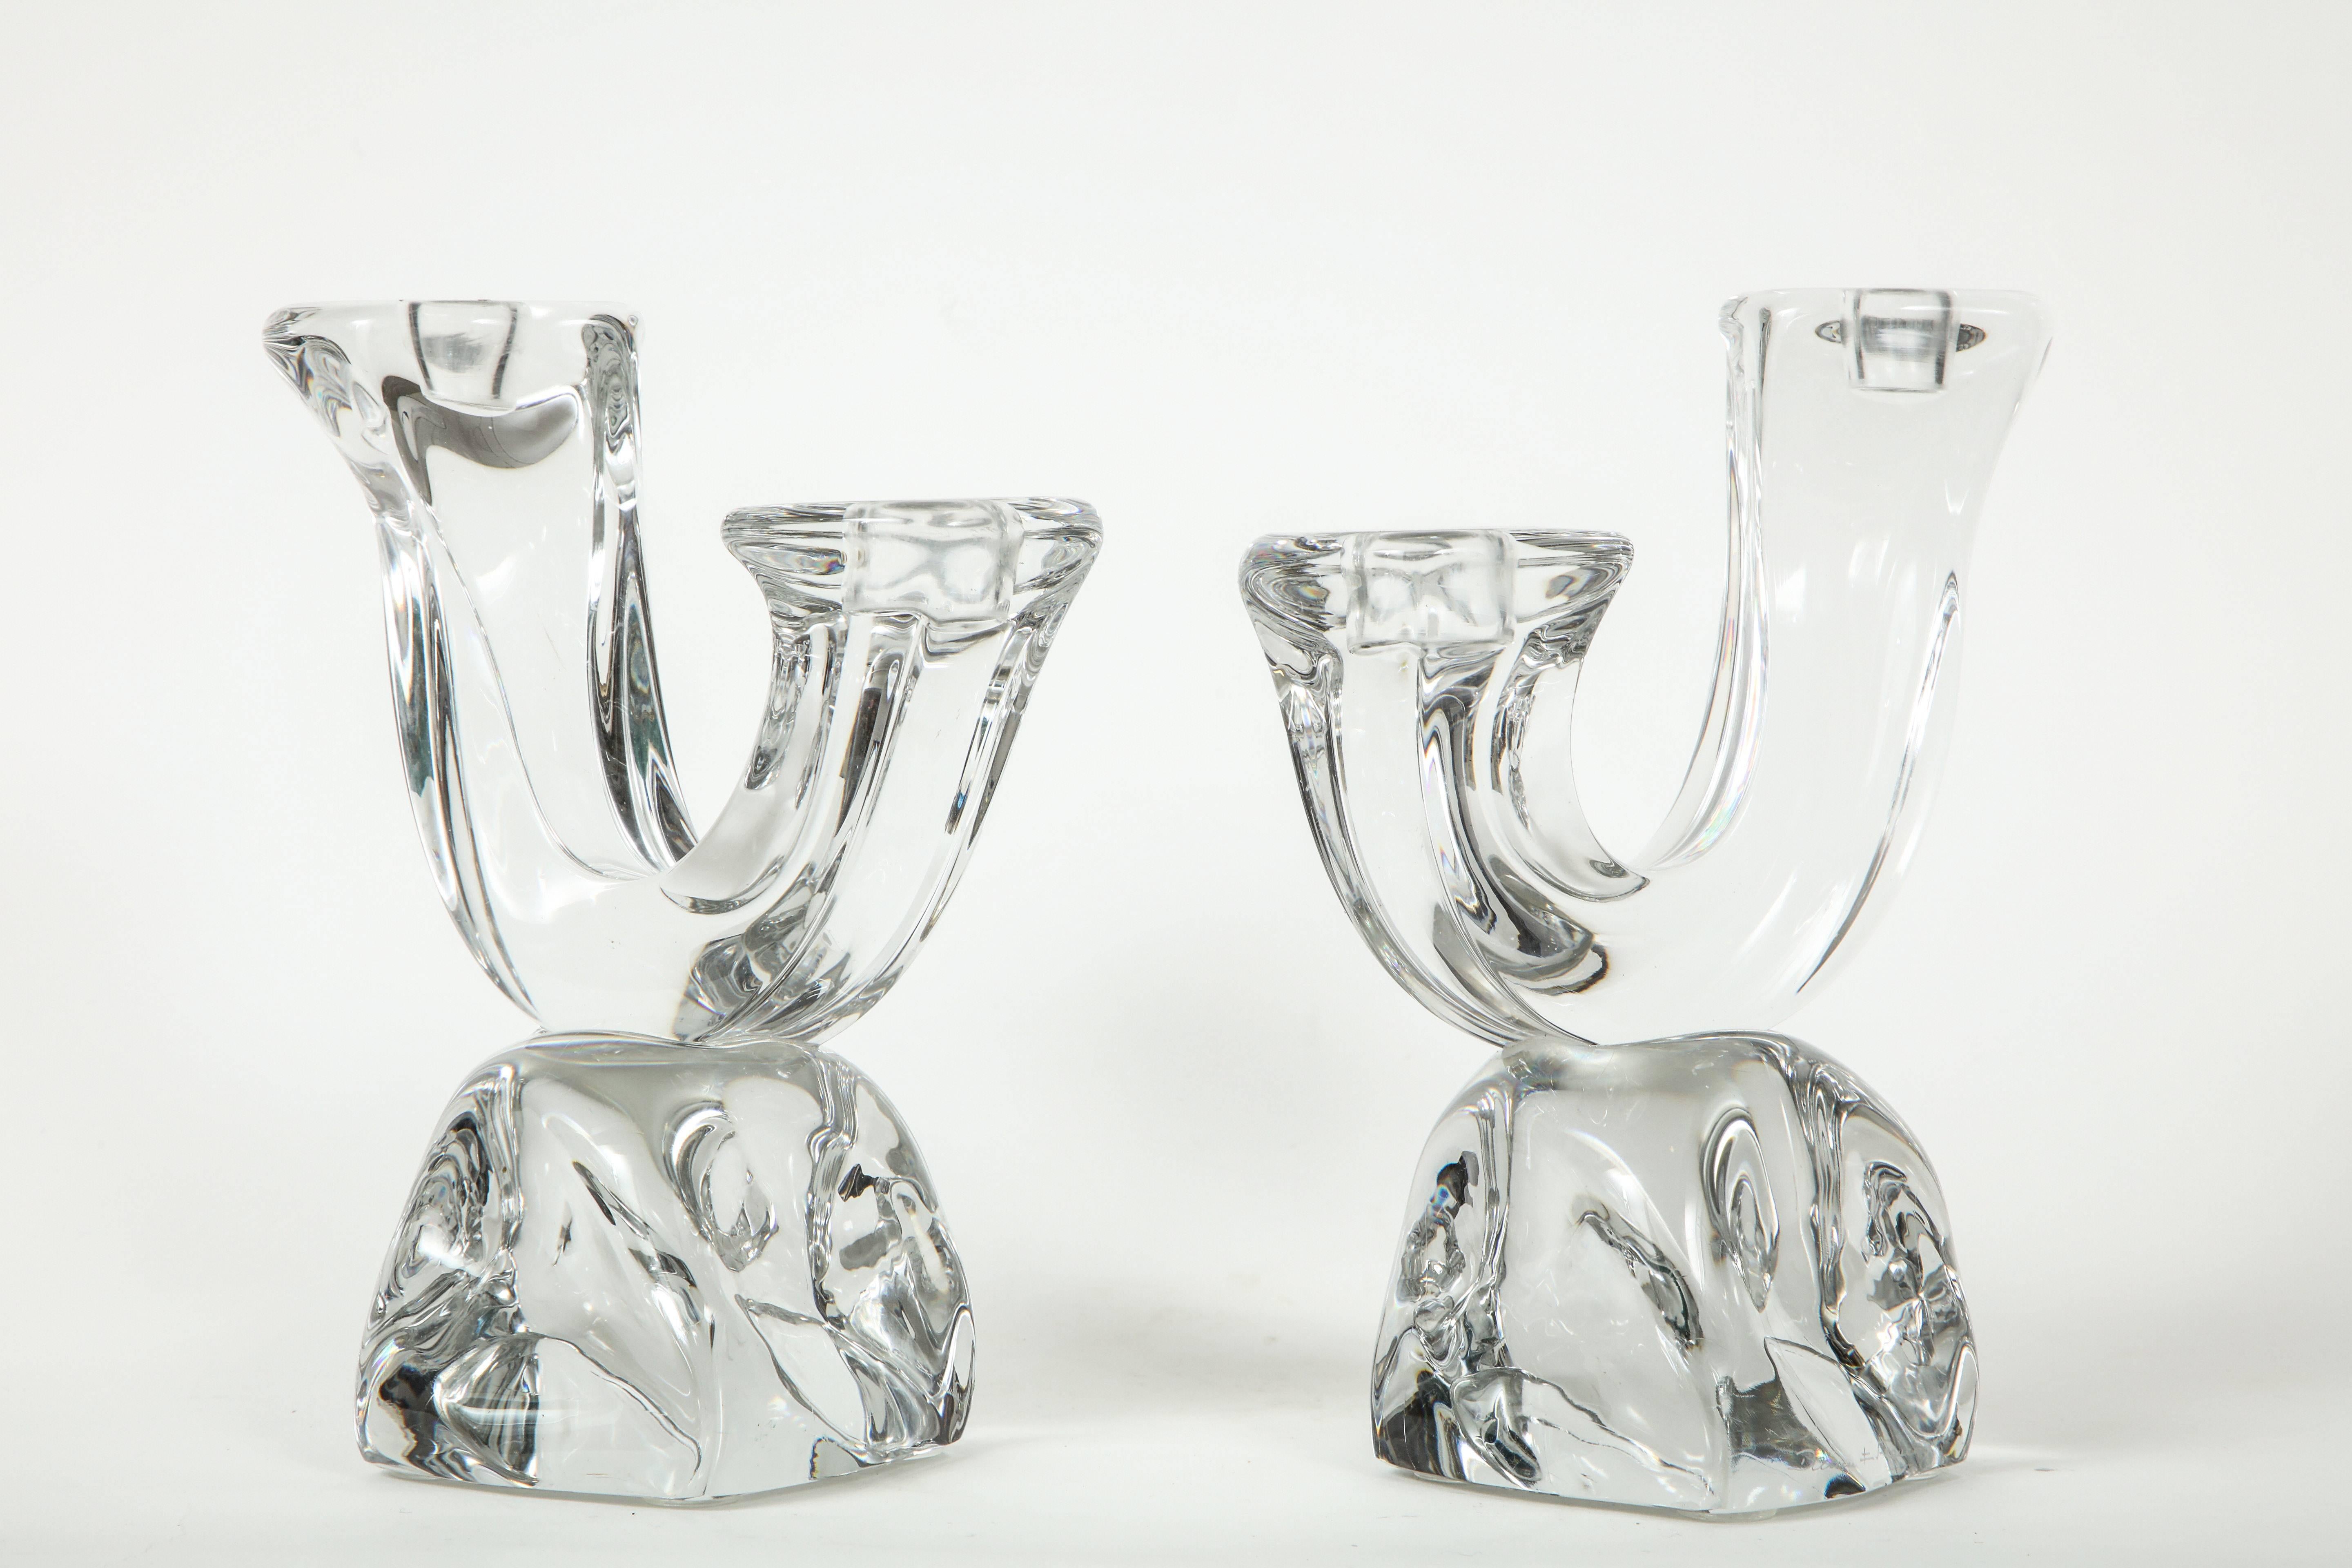 Rare pair of 1950s original chunky Daum candlesticks, a true icon of the time period. Heavy and quite impressive crystal to the eye. Signed Daum, Nancy. 